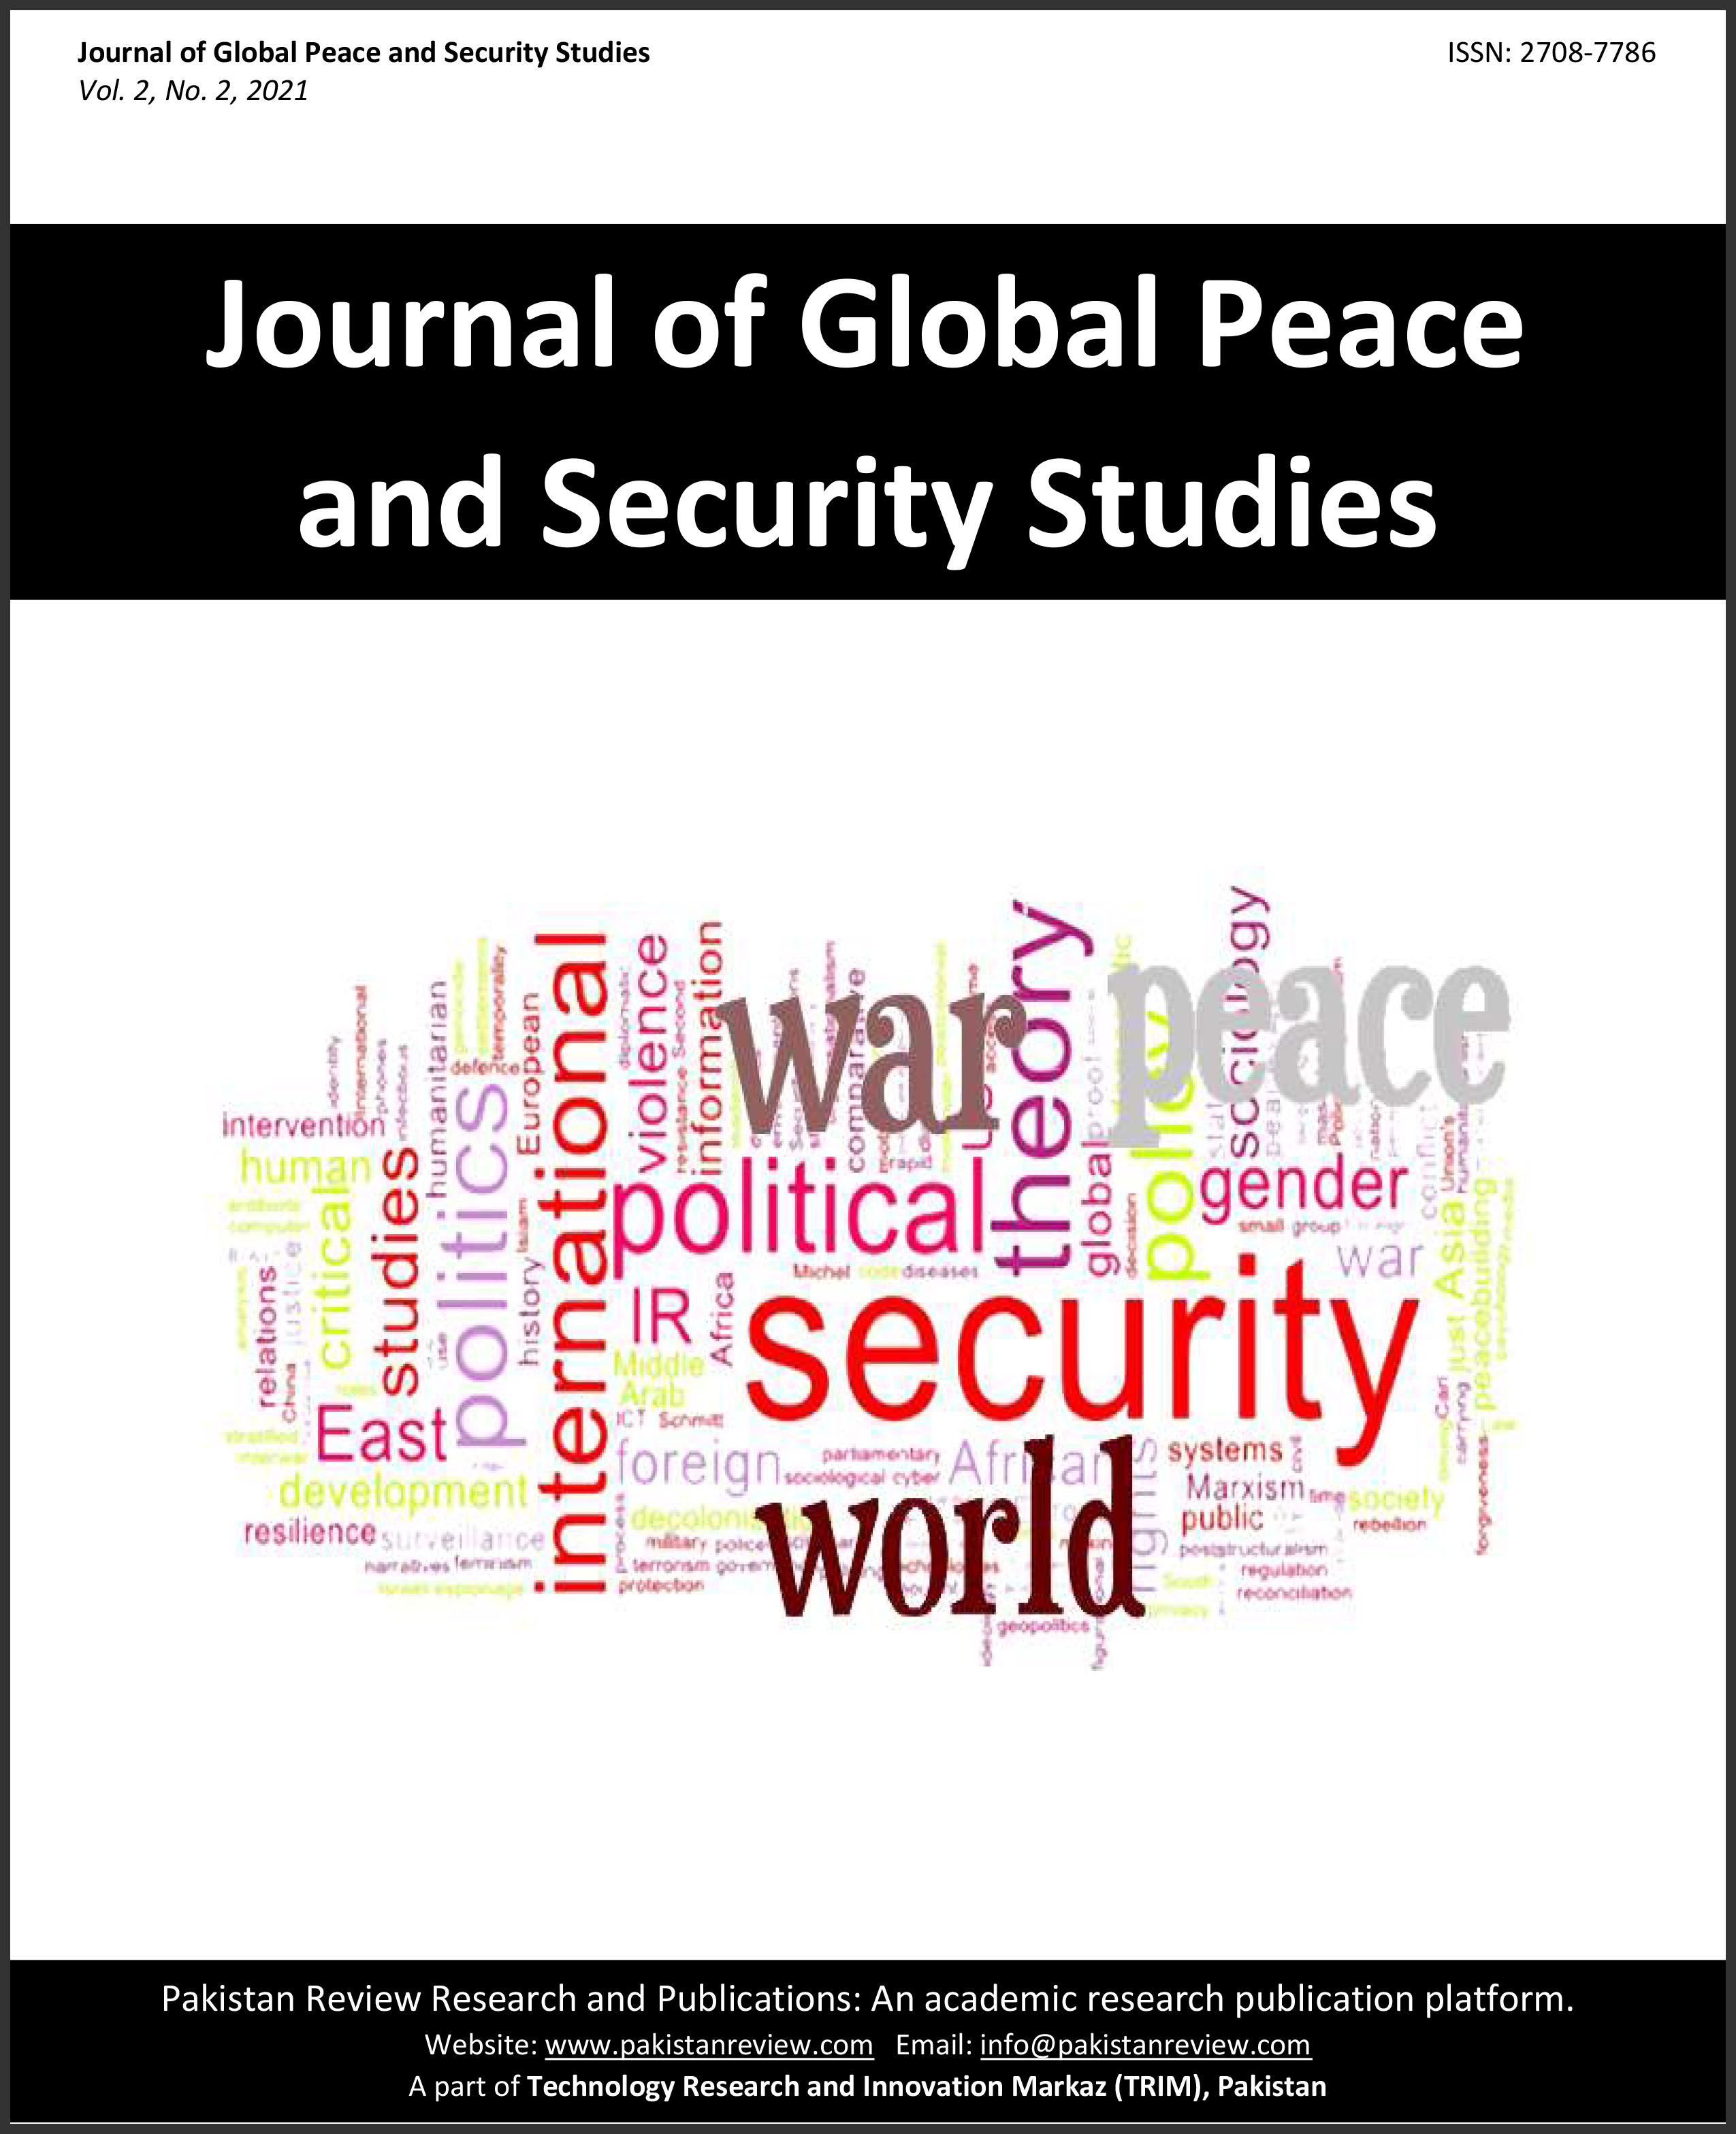 					View Vol. 2 No. 2 (2021): Journal of Global Peace and Security Studies (JGPSS)
				